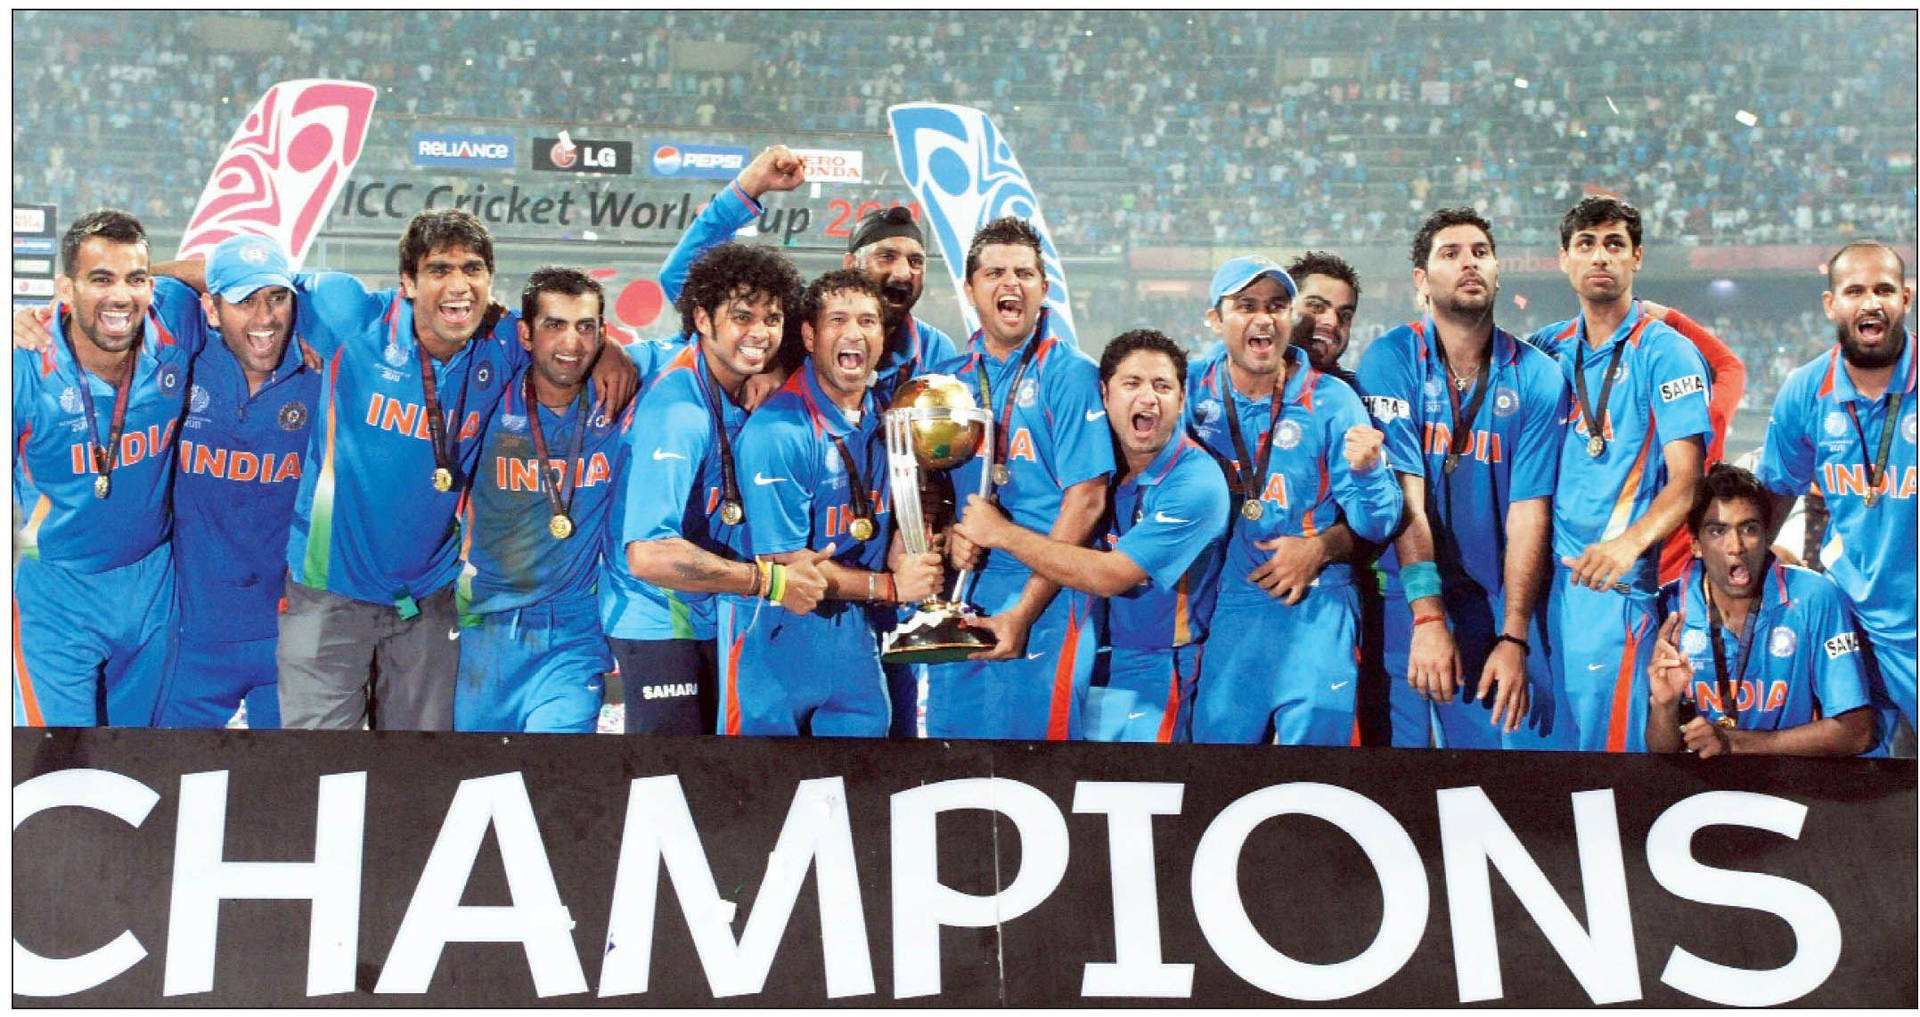 Indian Cricket Team With Champions Banner Wallpaper